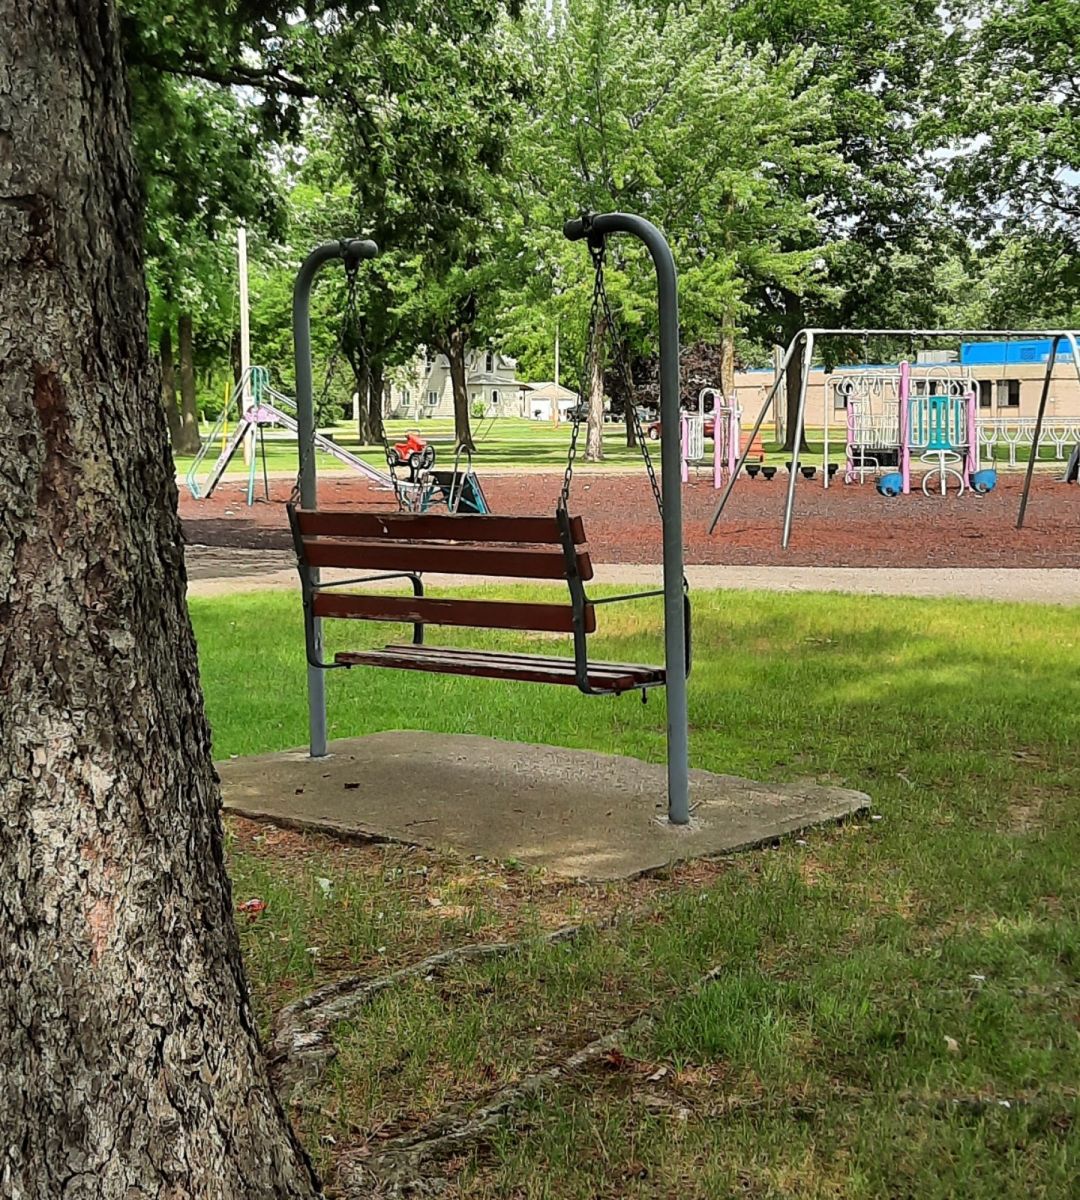 Bench Swing and playground swings